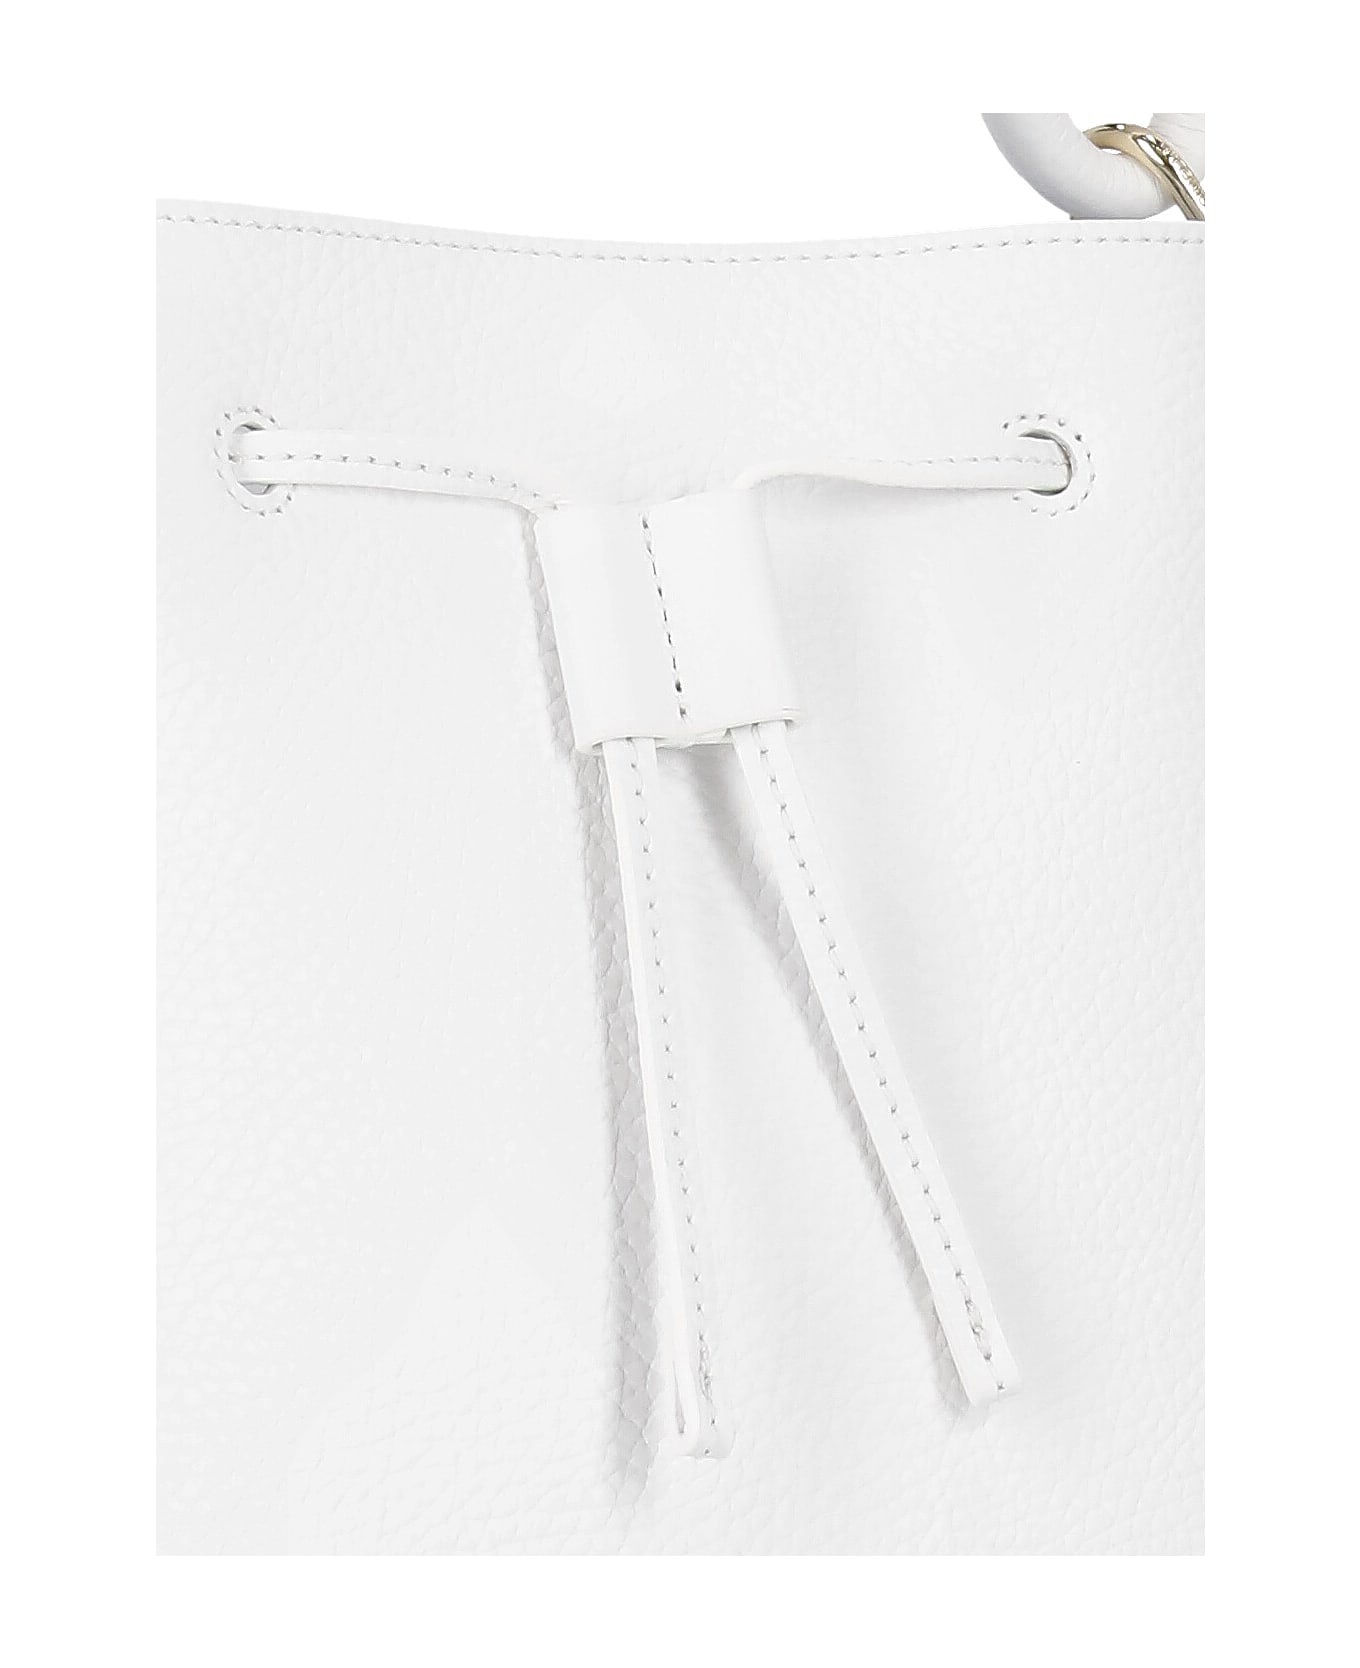 Coccinelle Eclips Hand Bag - White